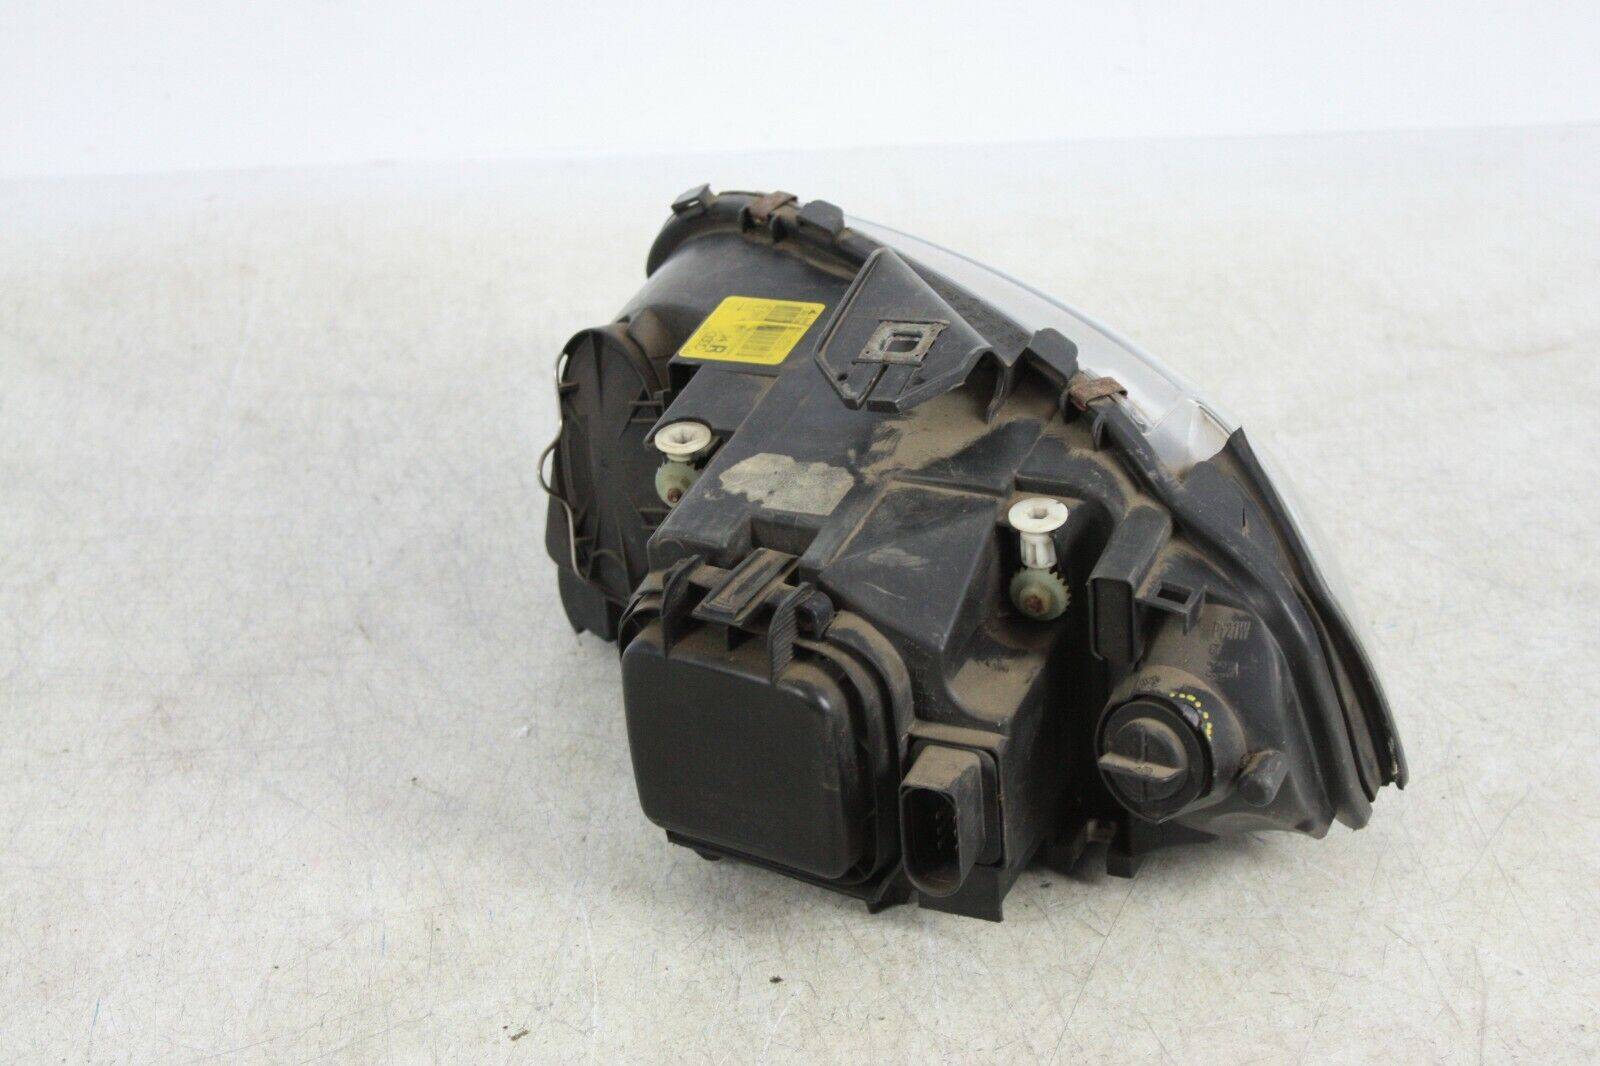 Audi-A3-Right-Side-Headlight-2004-TO-2008-8P0941004C-Genuine-175874026823-9